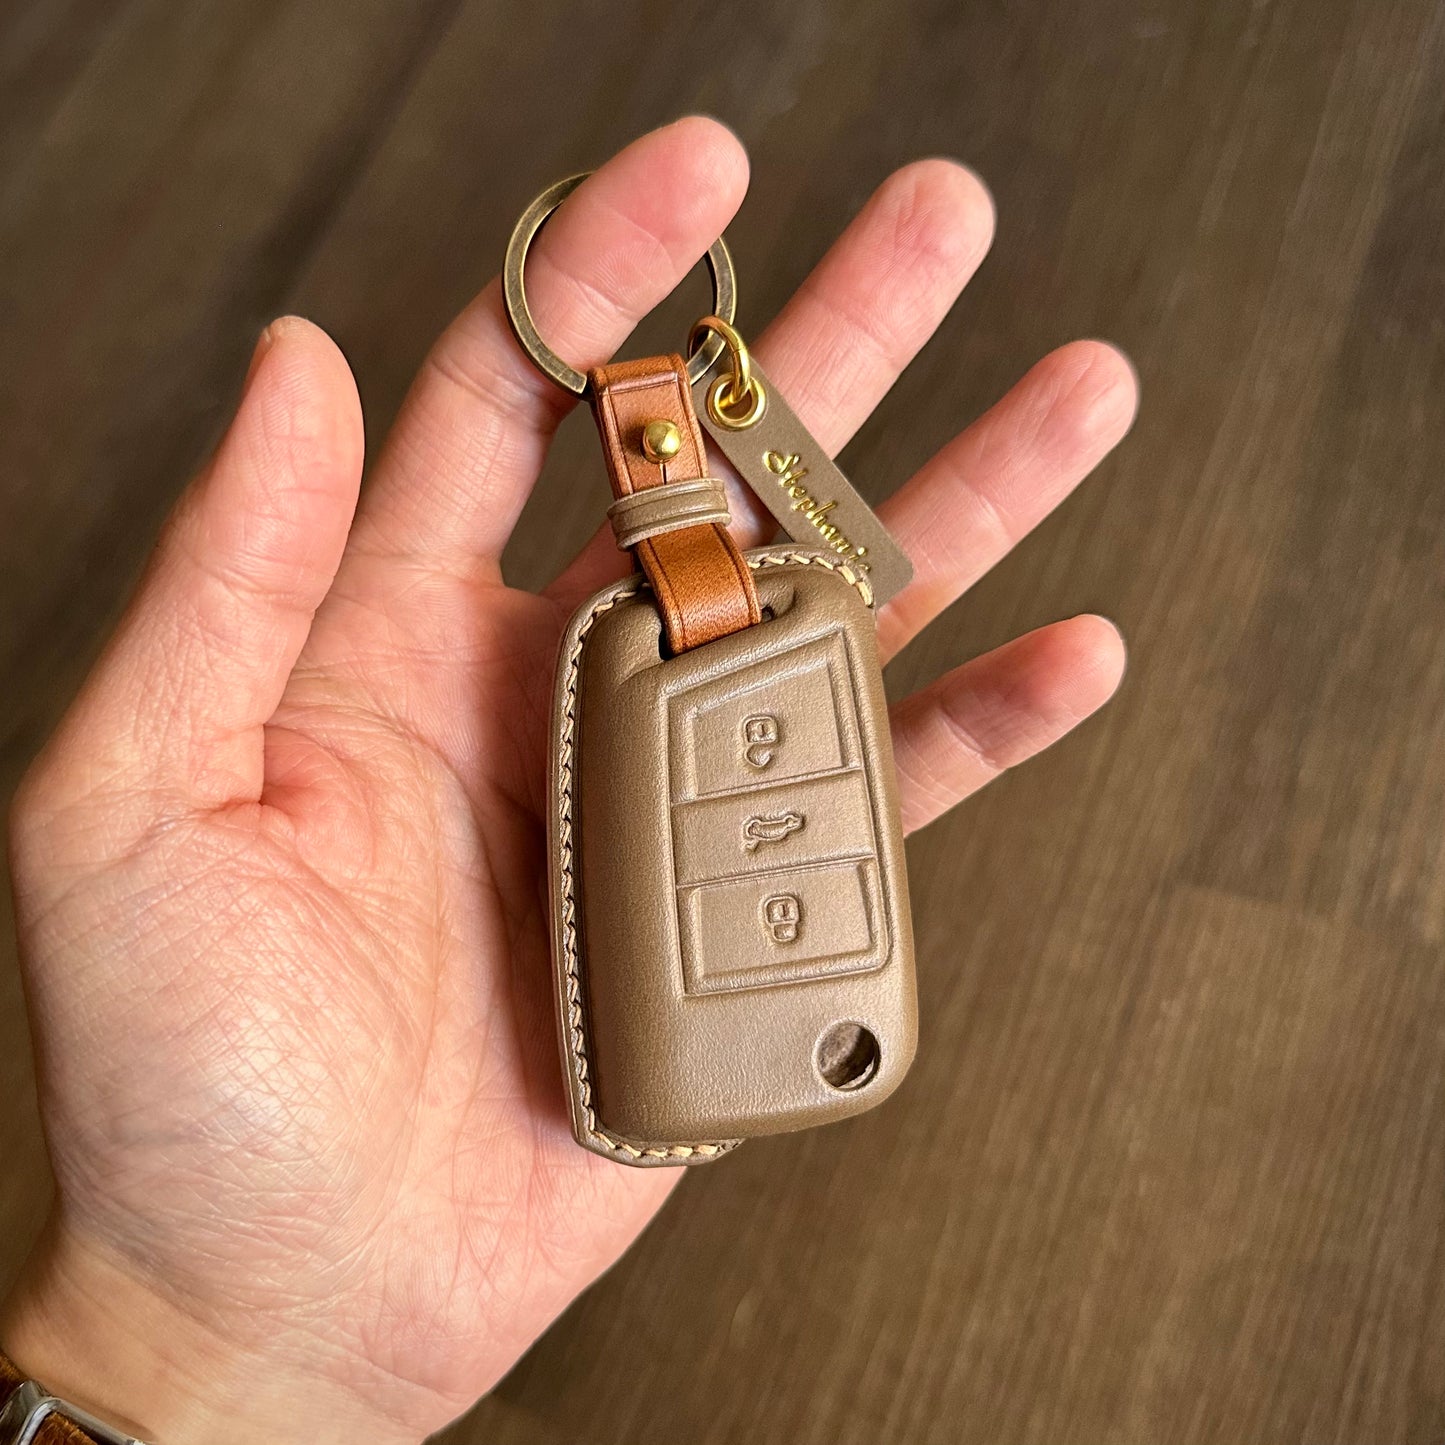 Volkswagen key fob cover, Buttero Leather key case